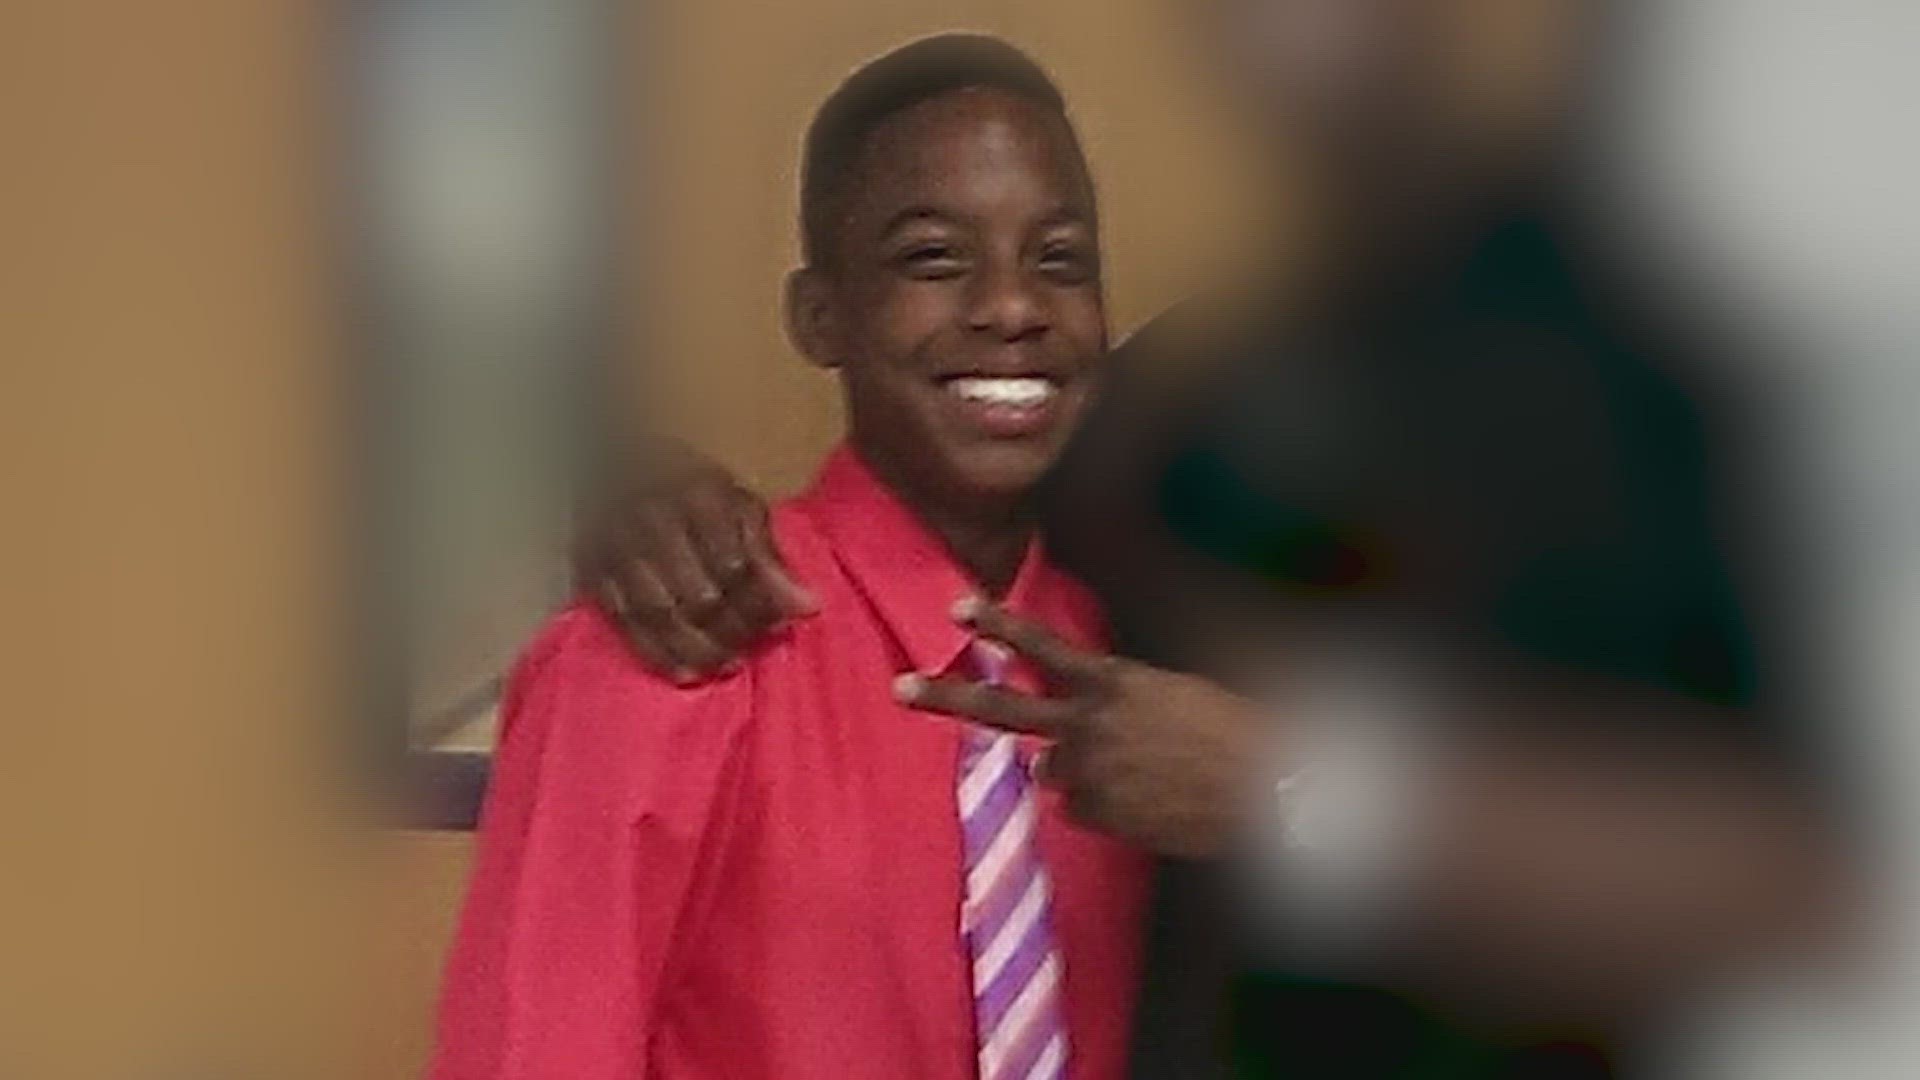 Roy Oliver was convicted of murder in the death of 15-year-old Jordan Edwards in 2018. A verdict was reached in his federal civil trial.